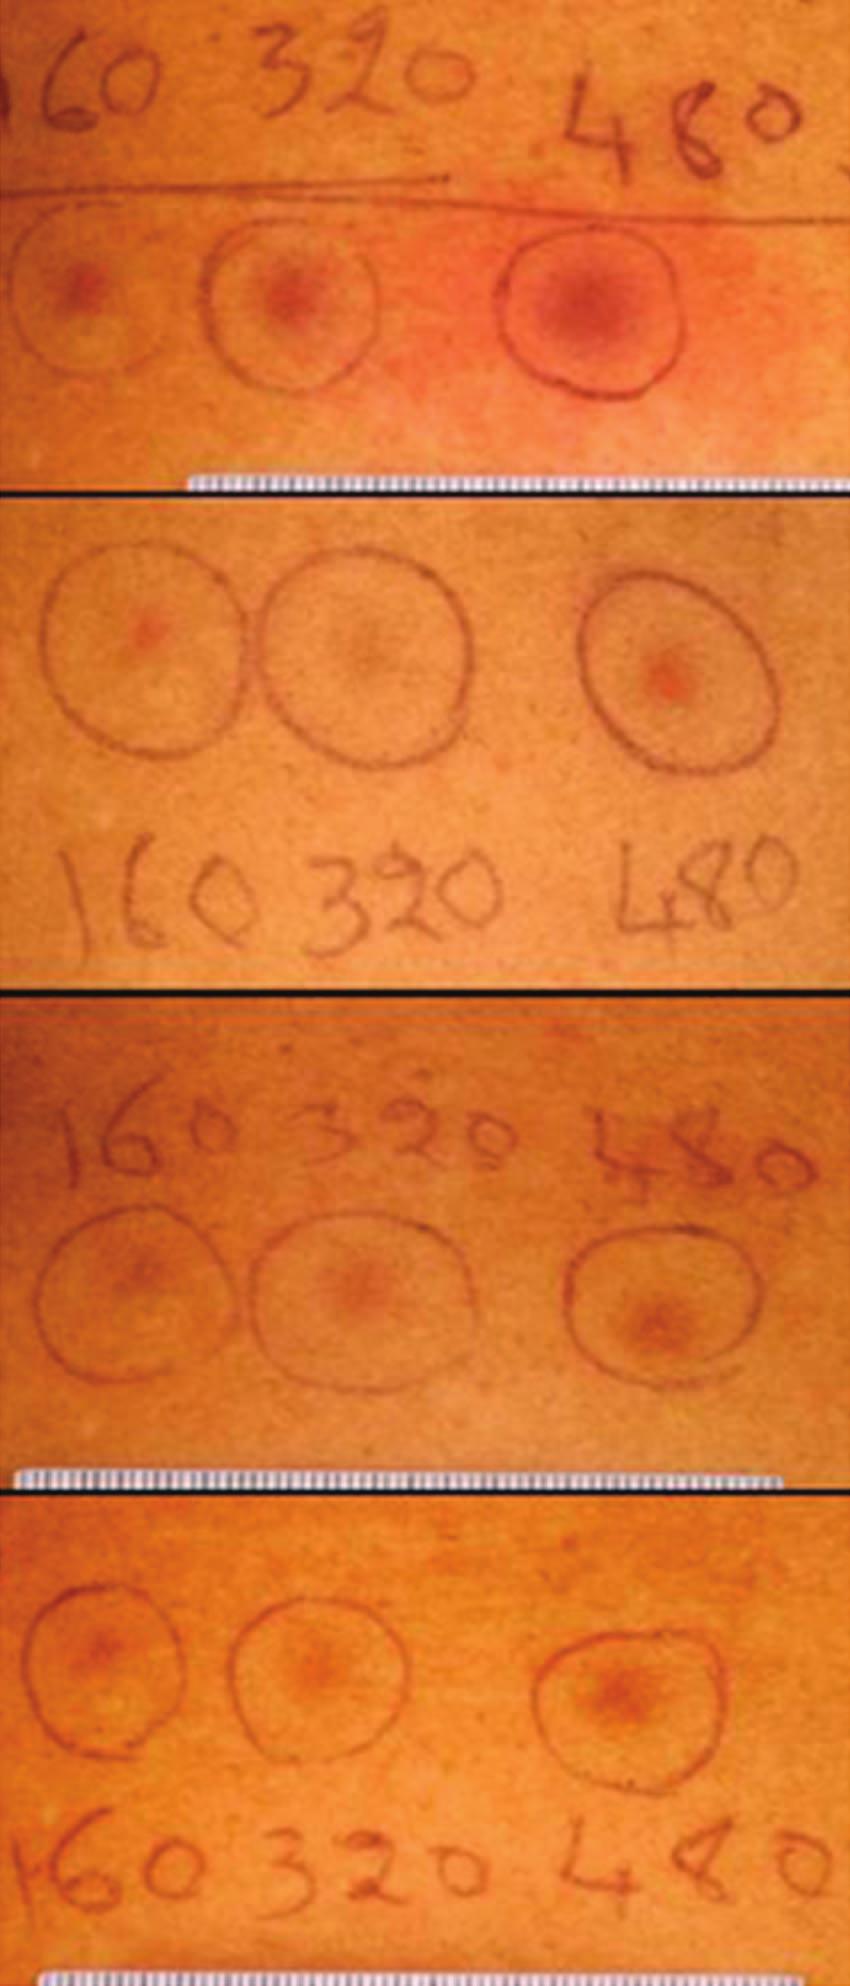 Crosspolarized images of sites irradiated with UVA1 (a d) and visible light (e l) at different times on both type V (e h) and type II (i l) skin.